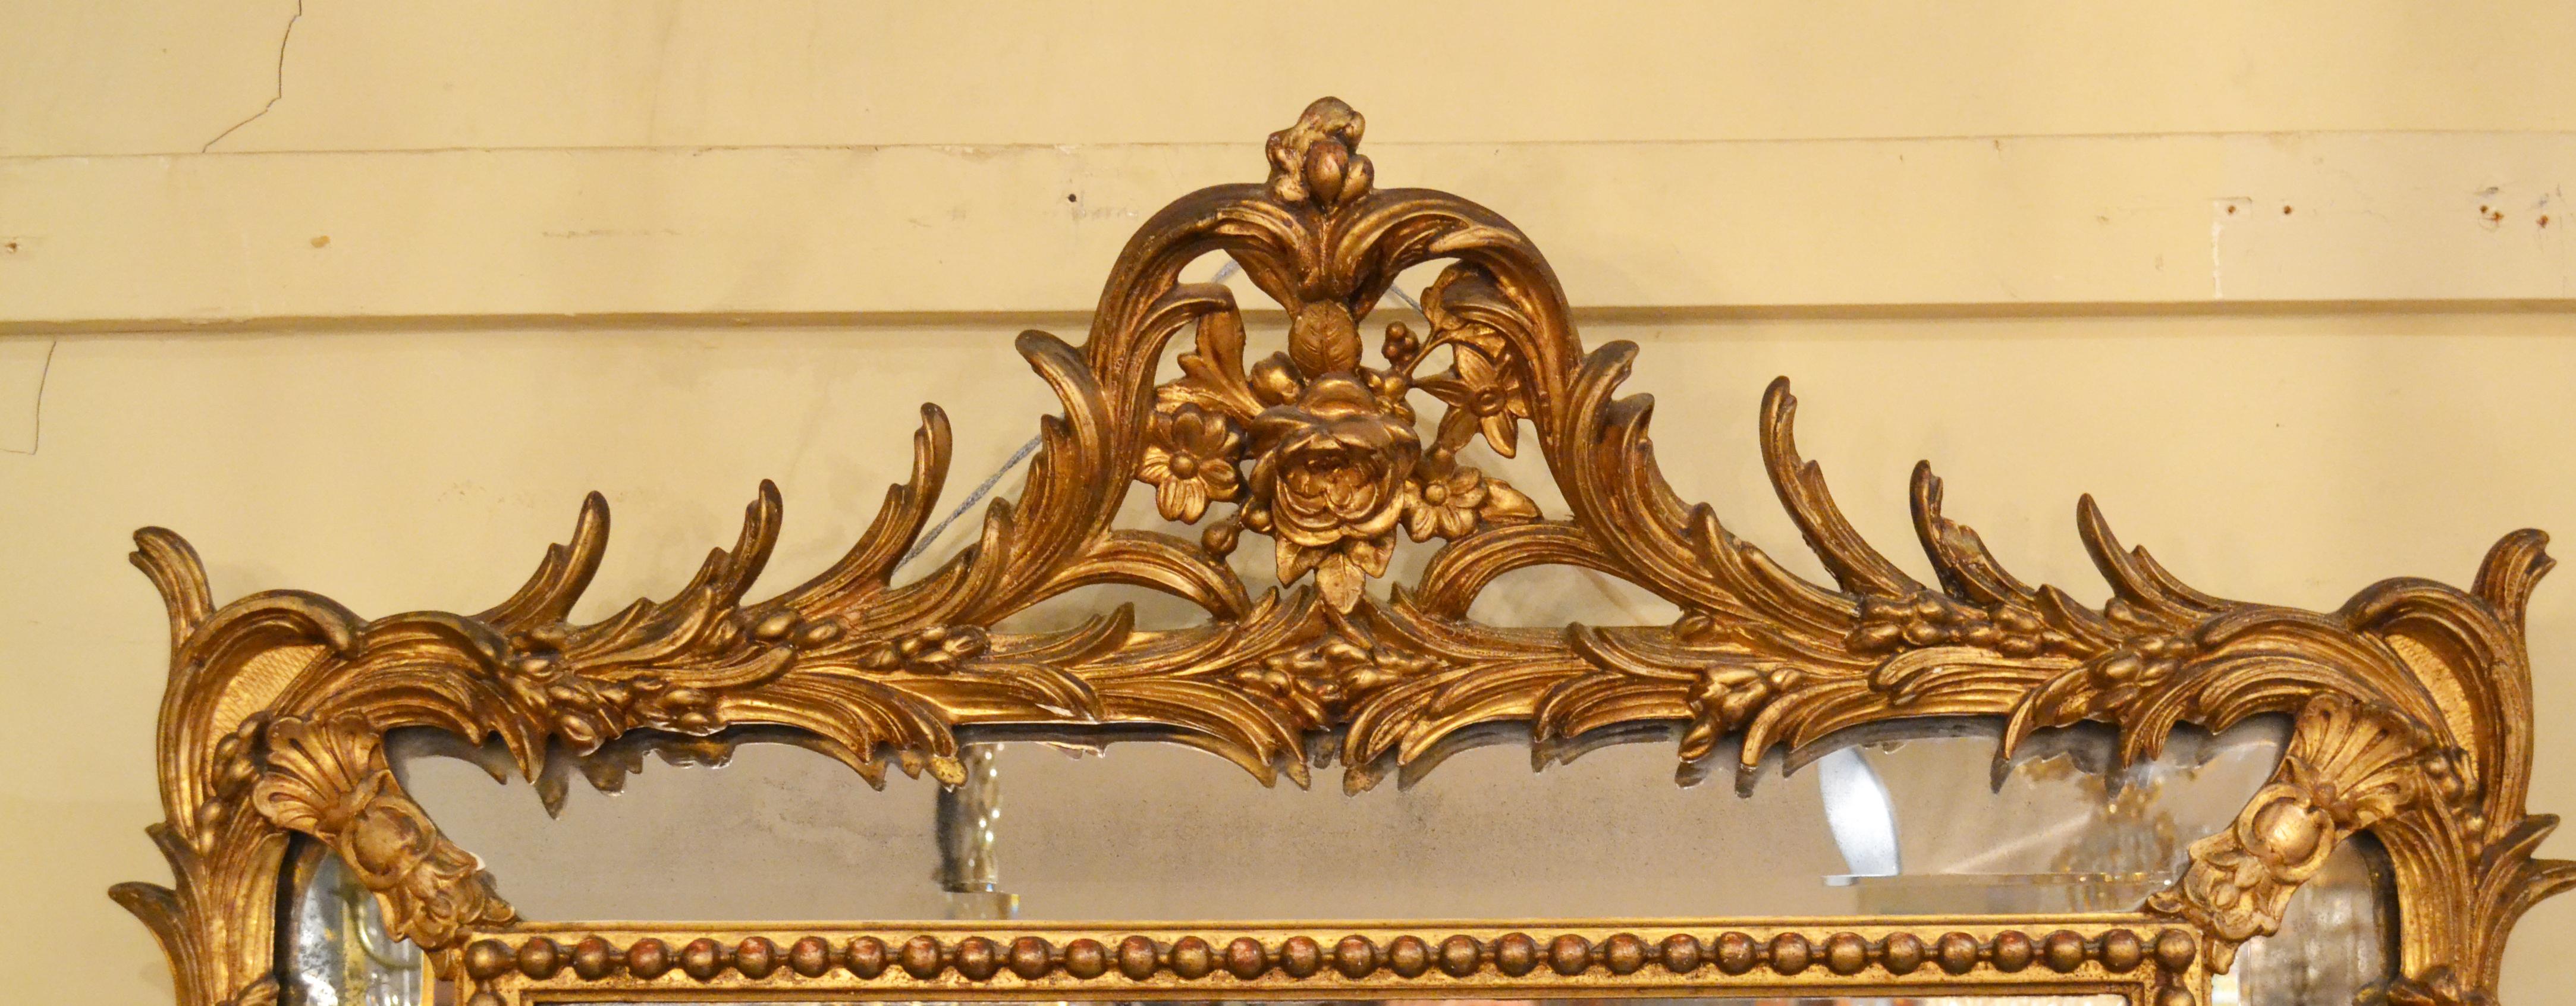 Antique French gold leaf beveled mirror. Nicely rendered with handsome decoration.